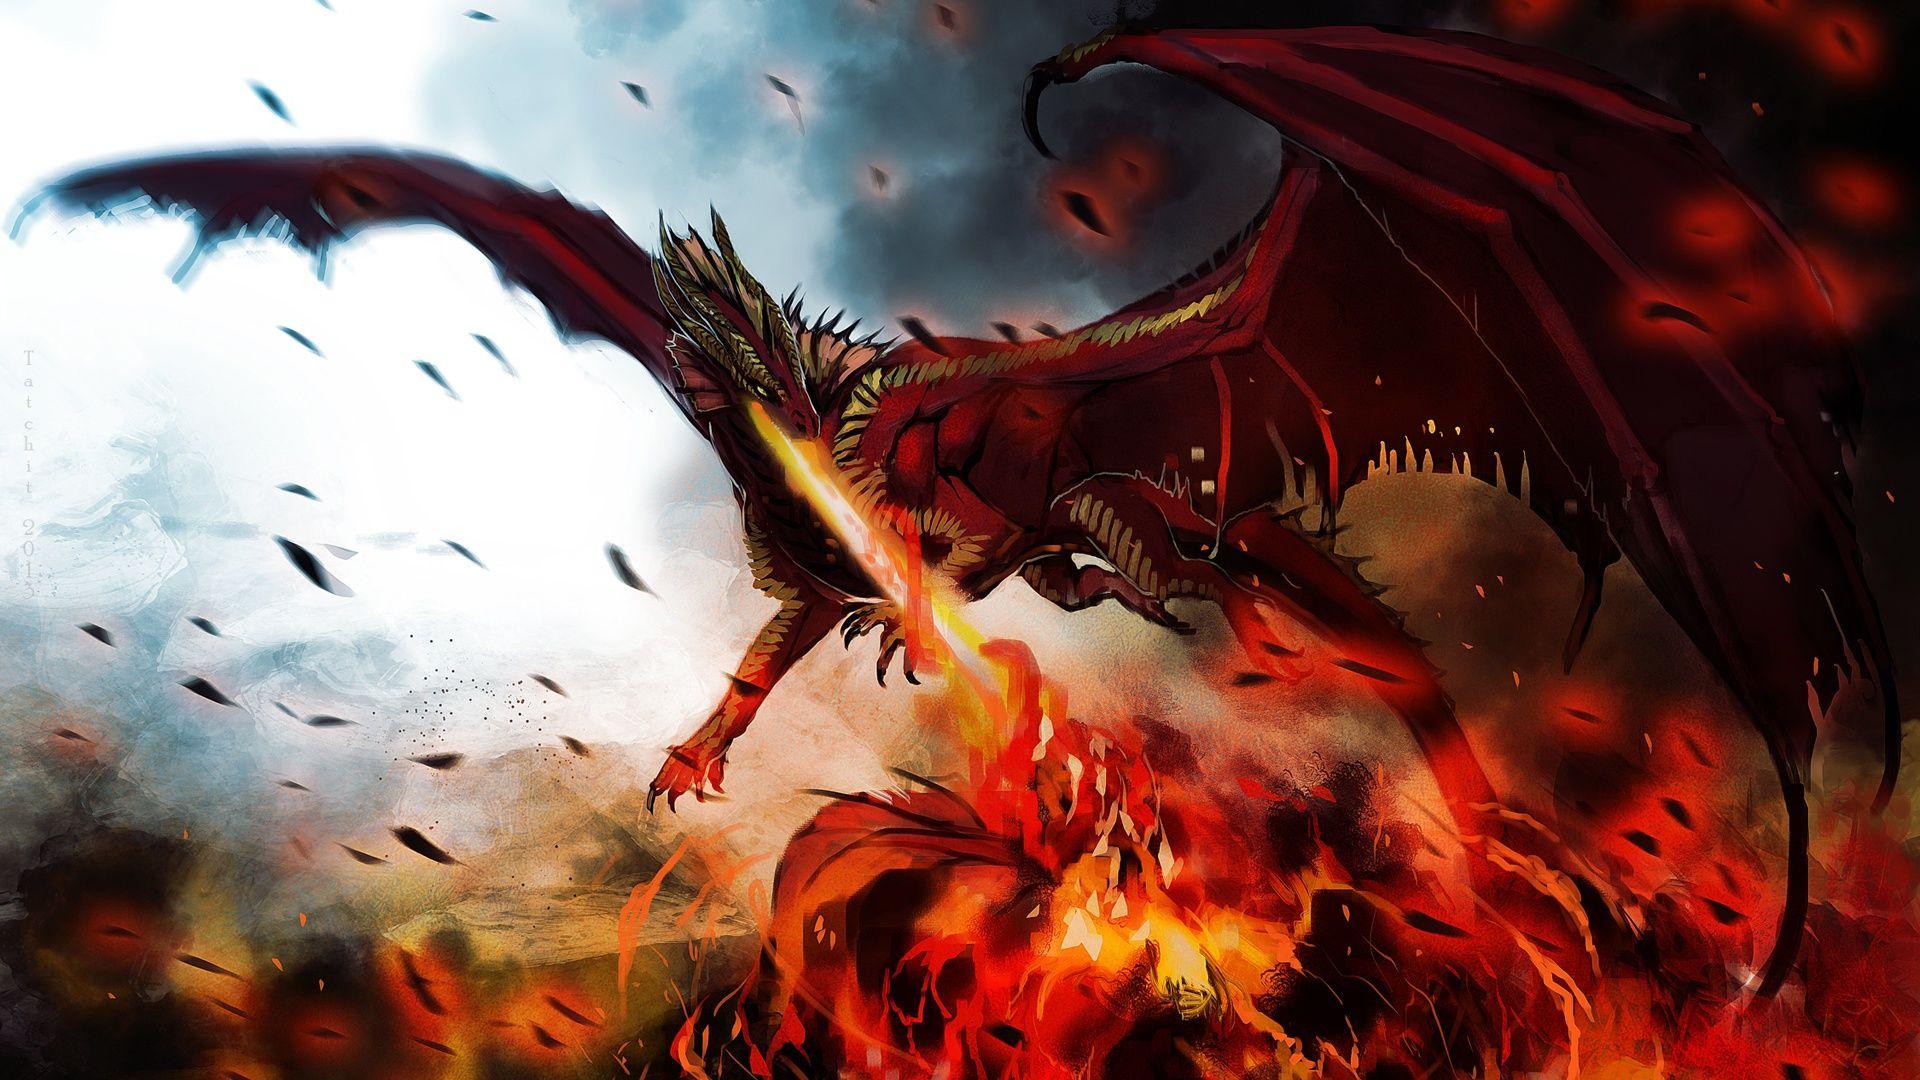 Wings of Fire Dragons Wallpapers - Top Free Wings of Fire Dragons ...